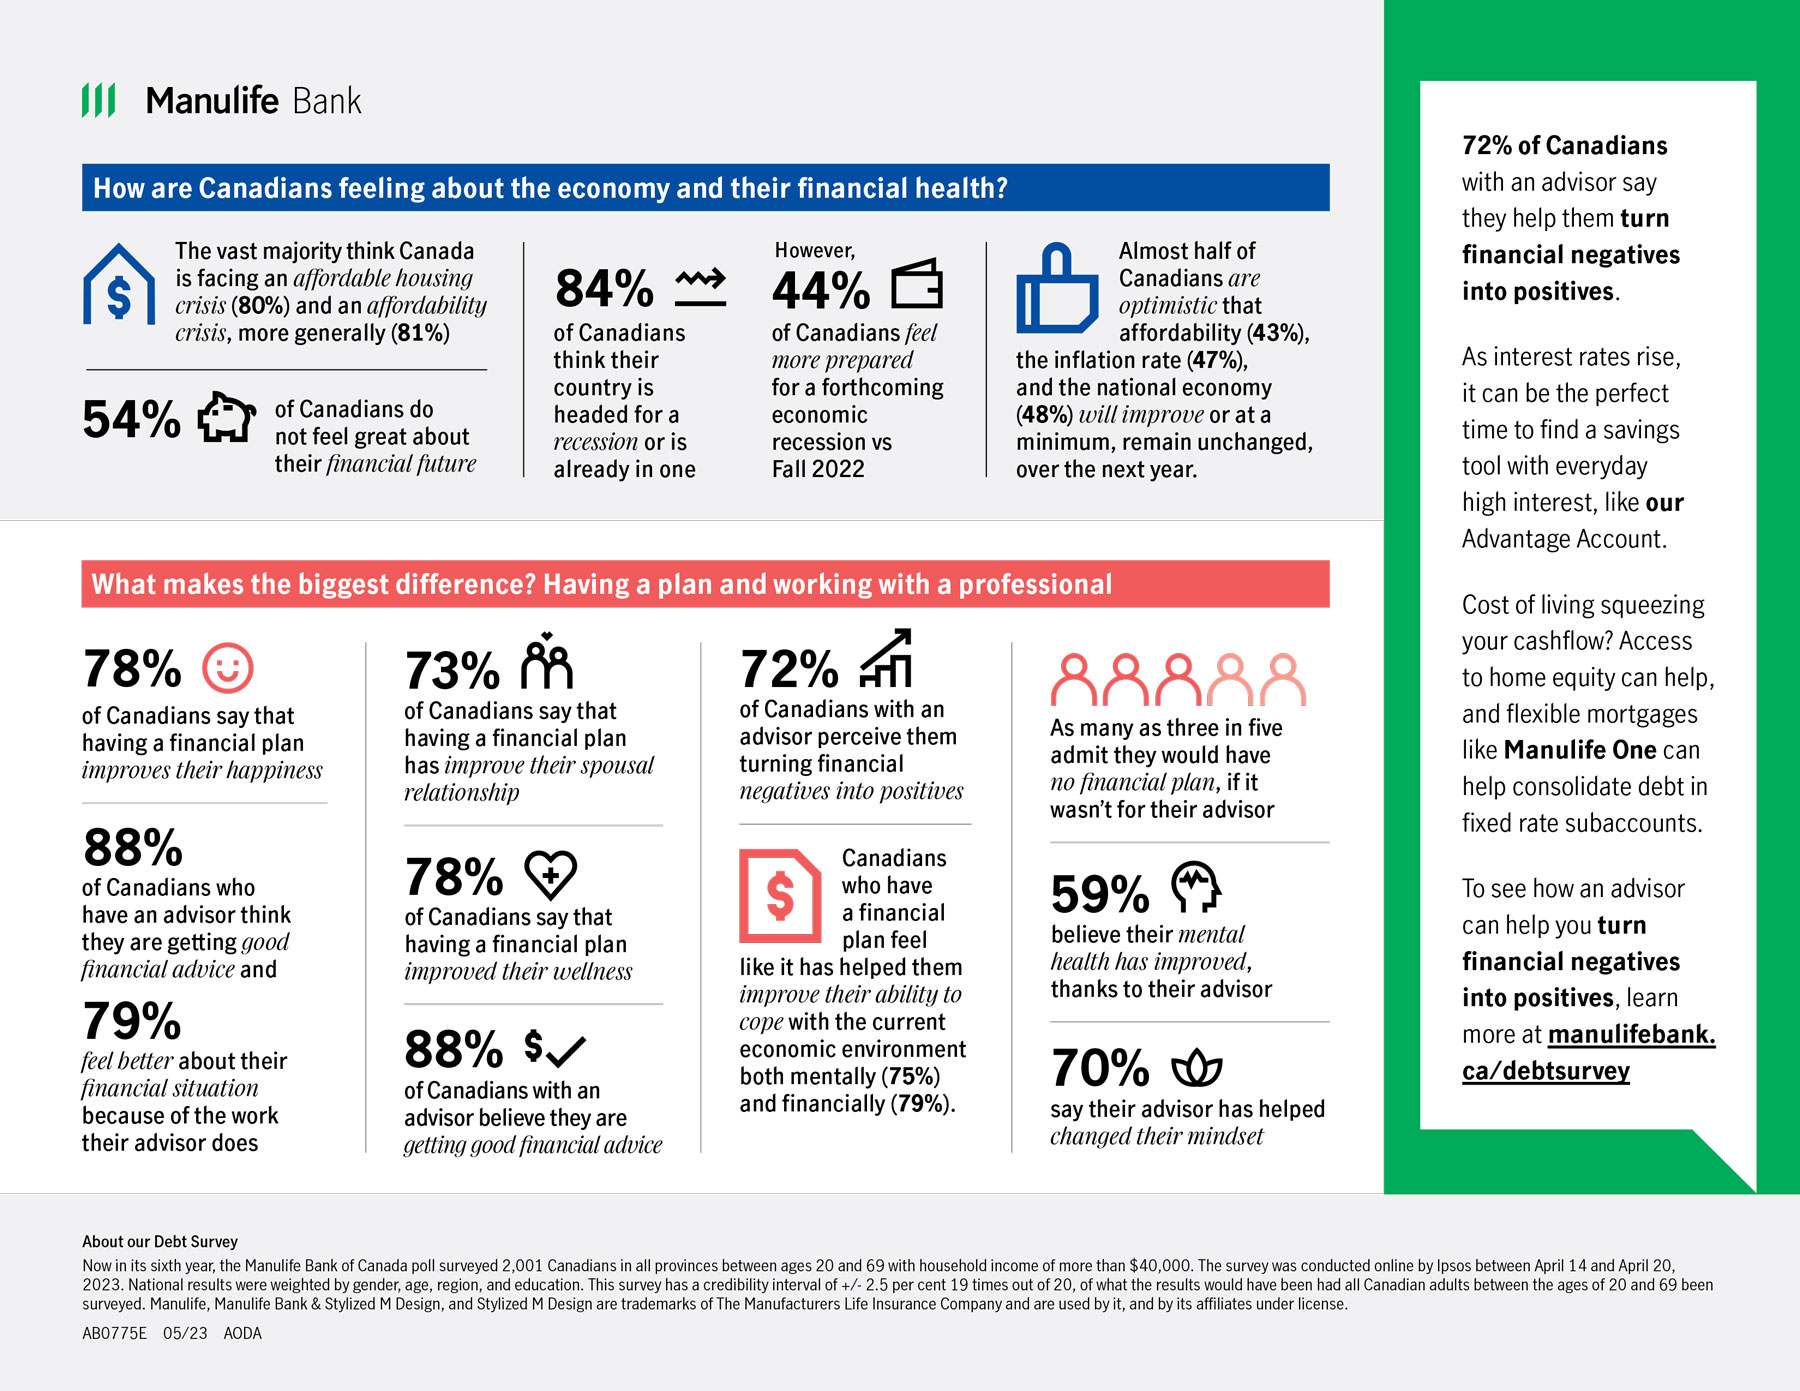 Image about the Manulife Bank Financial Health Survey